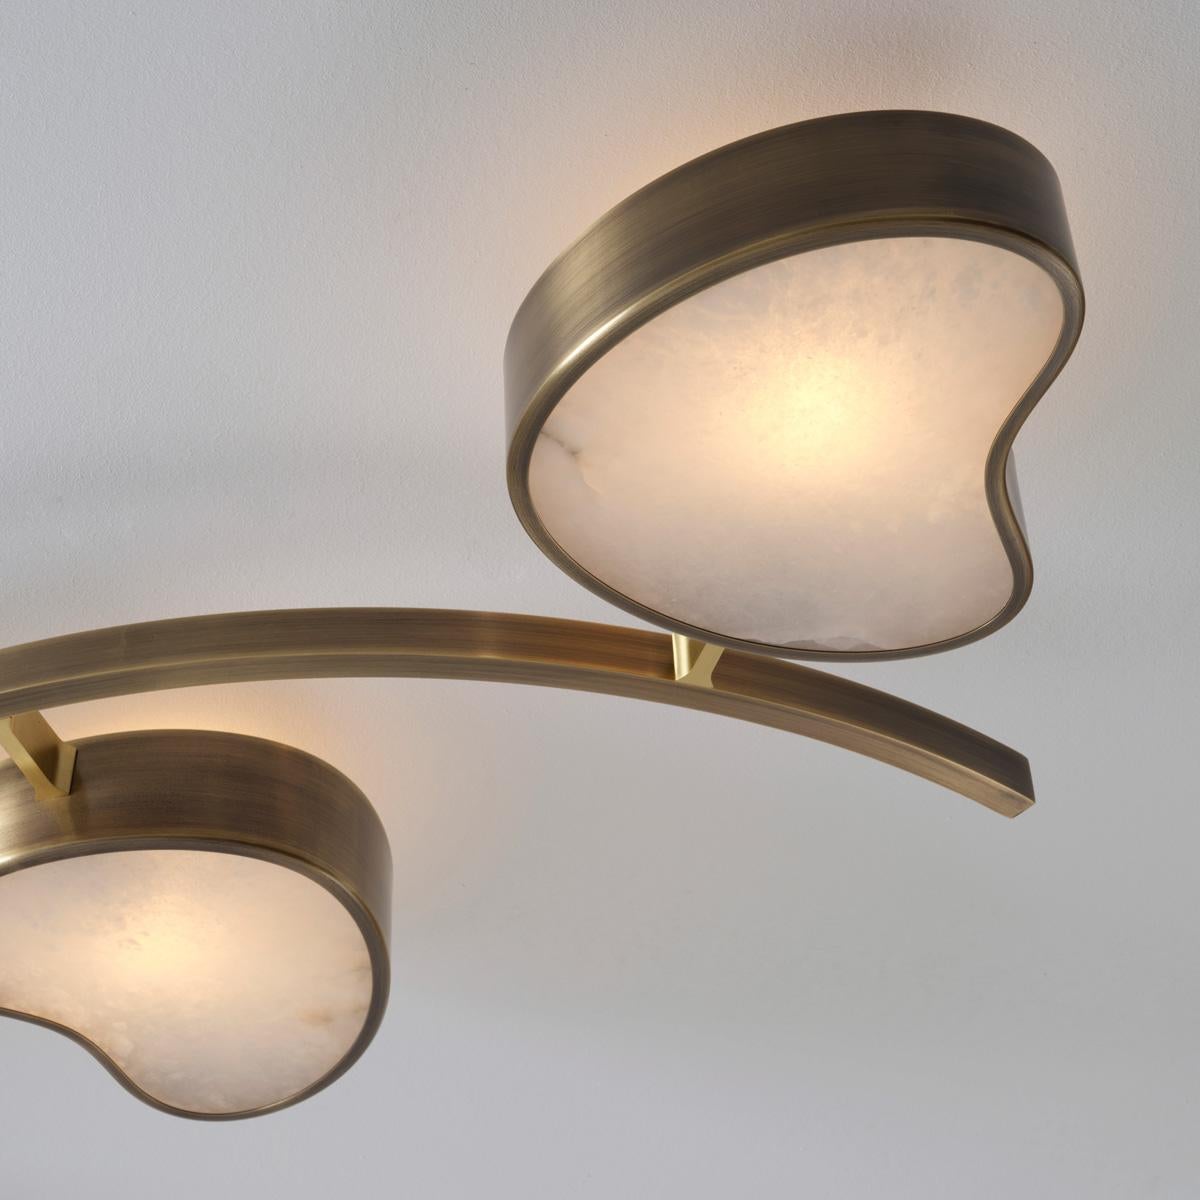 Contemporary Cuore N.6 Ceiling Light by Gaspare Asaro. Bronze and Satin Brass Finish For Sale